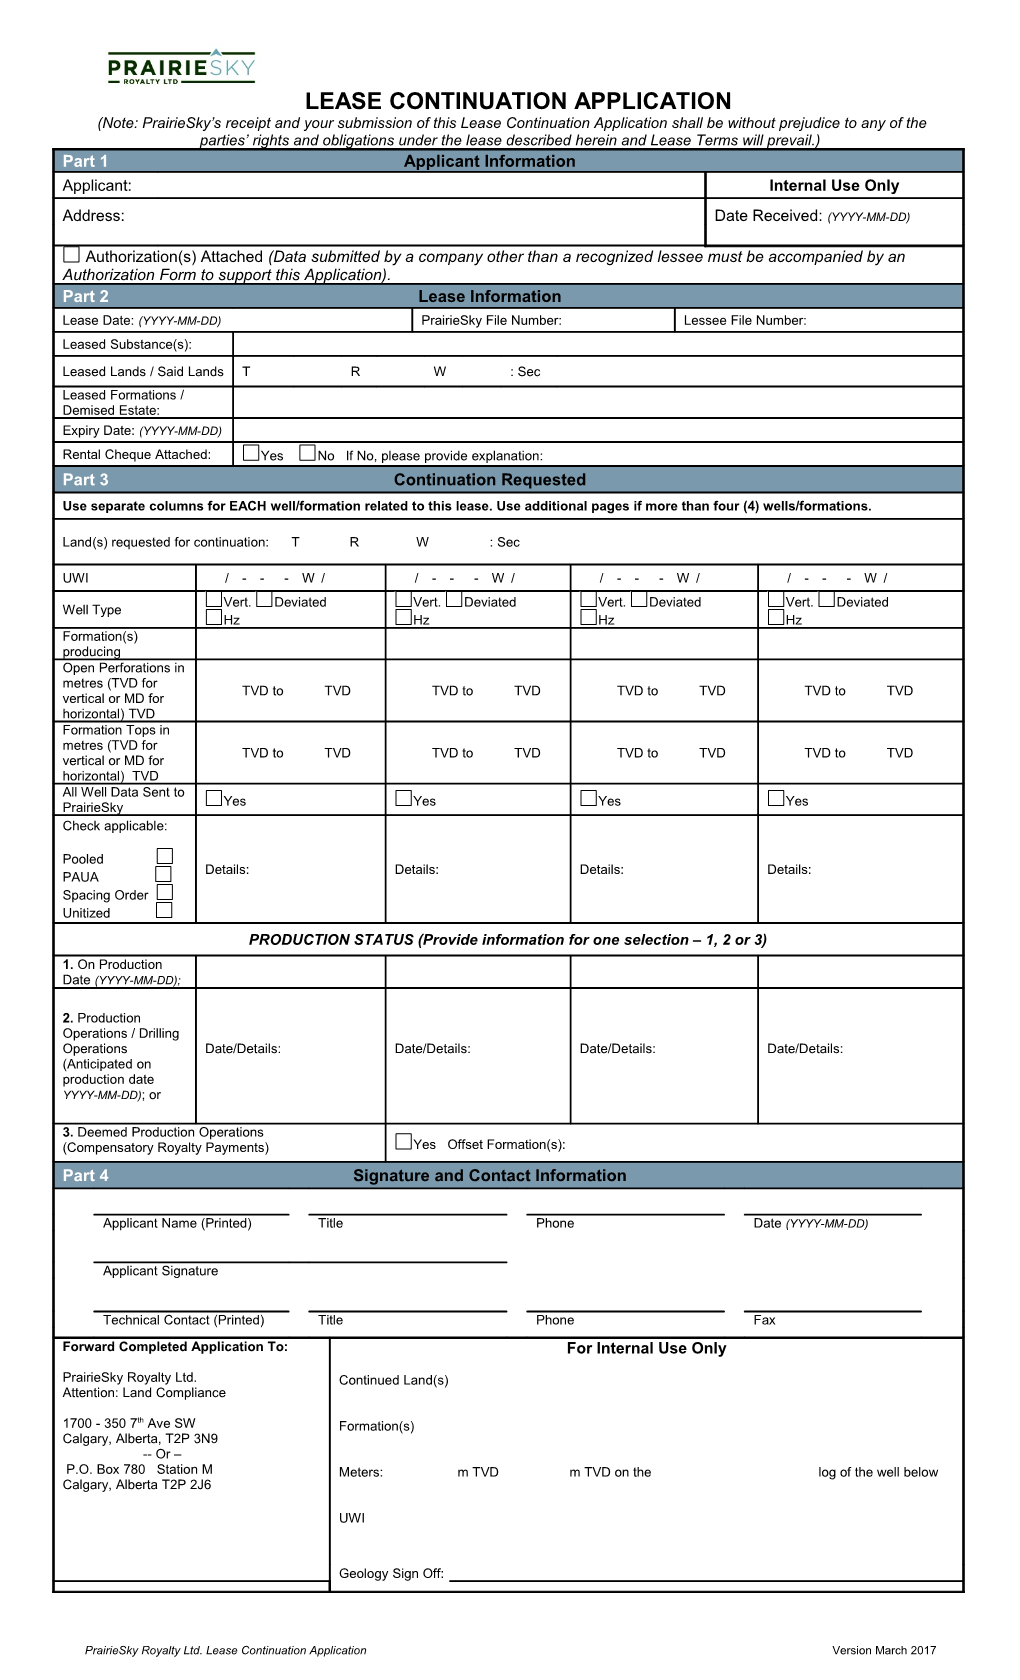 Lease Continuation Application